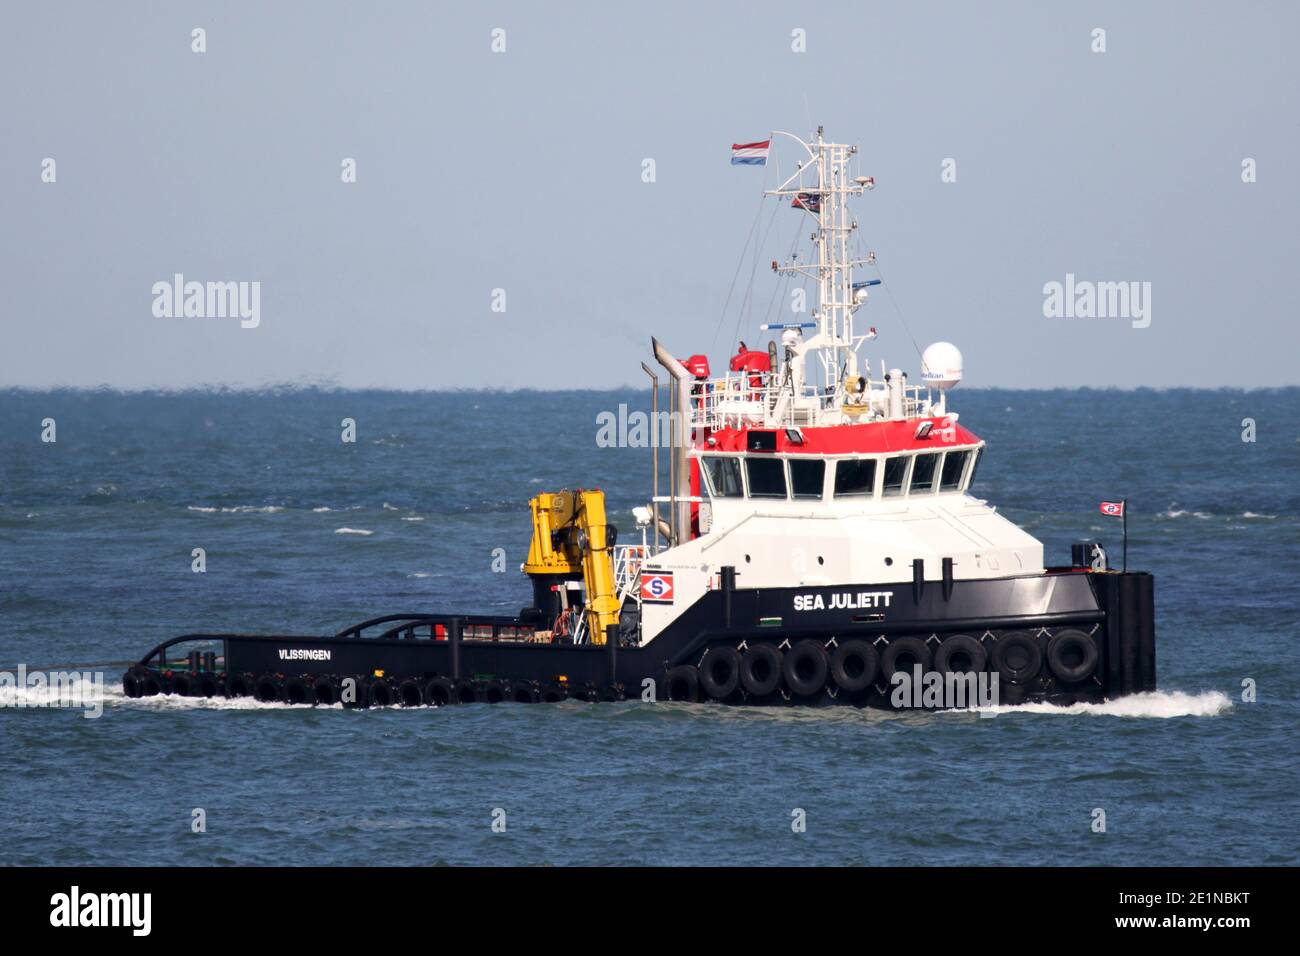 The small offshore tug Sea Juliett will reach the port of Rotterdam on September 18, 2020. Stock Photo